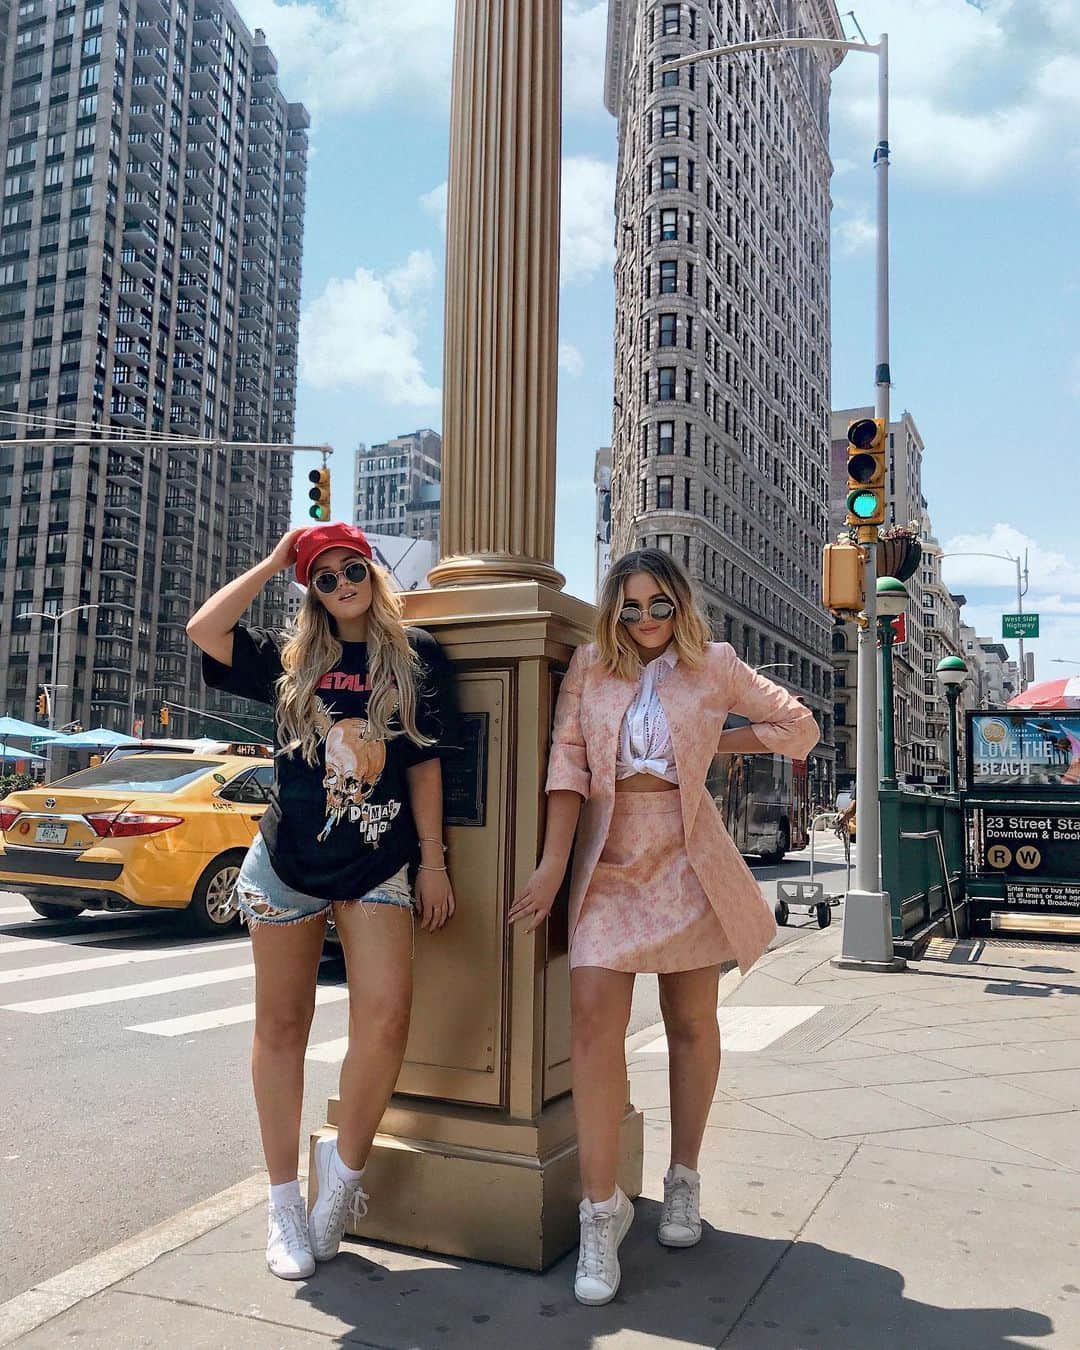 Lucy Connellのインスタグラム：「New York Minute...🗽✨  Just found this photo from our New York trip and remembered how much we loved pretending we were Mary-Kate and Ashley for the day. Look, we even recreated the outfits from the film! 💖」